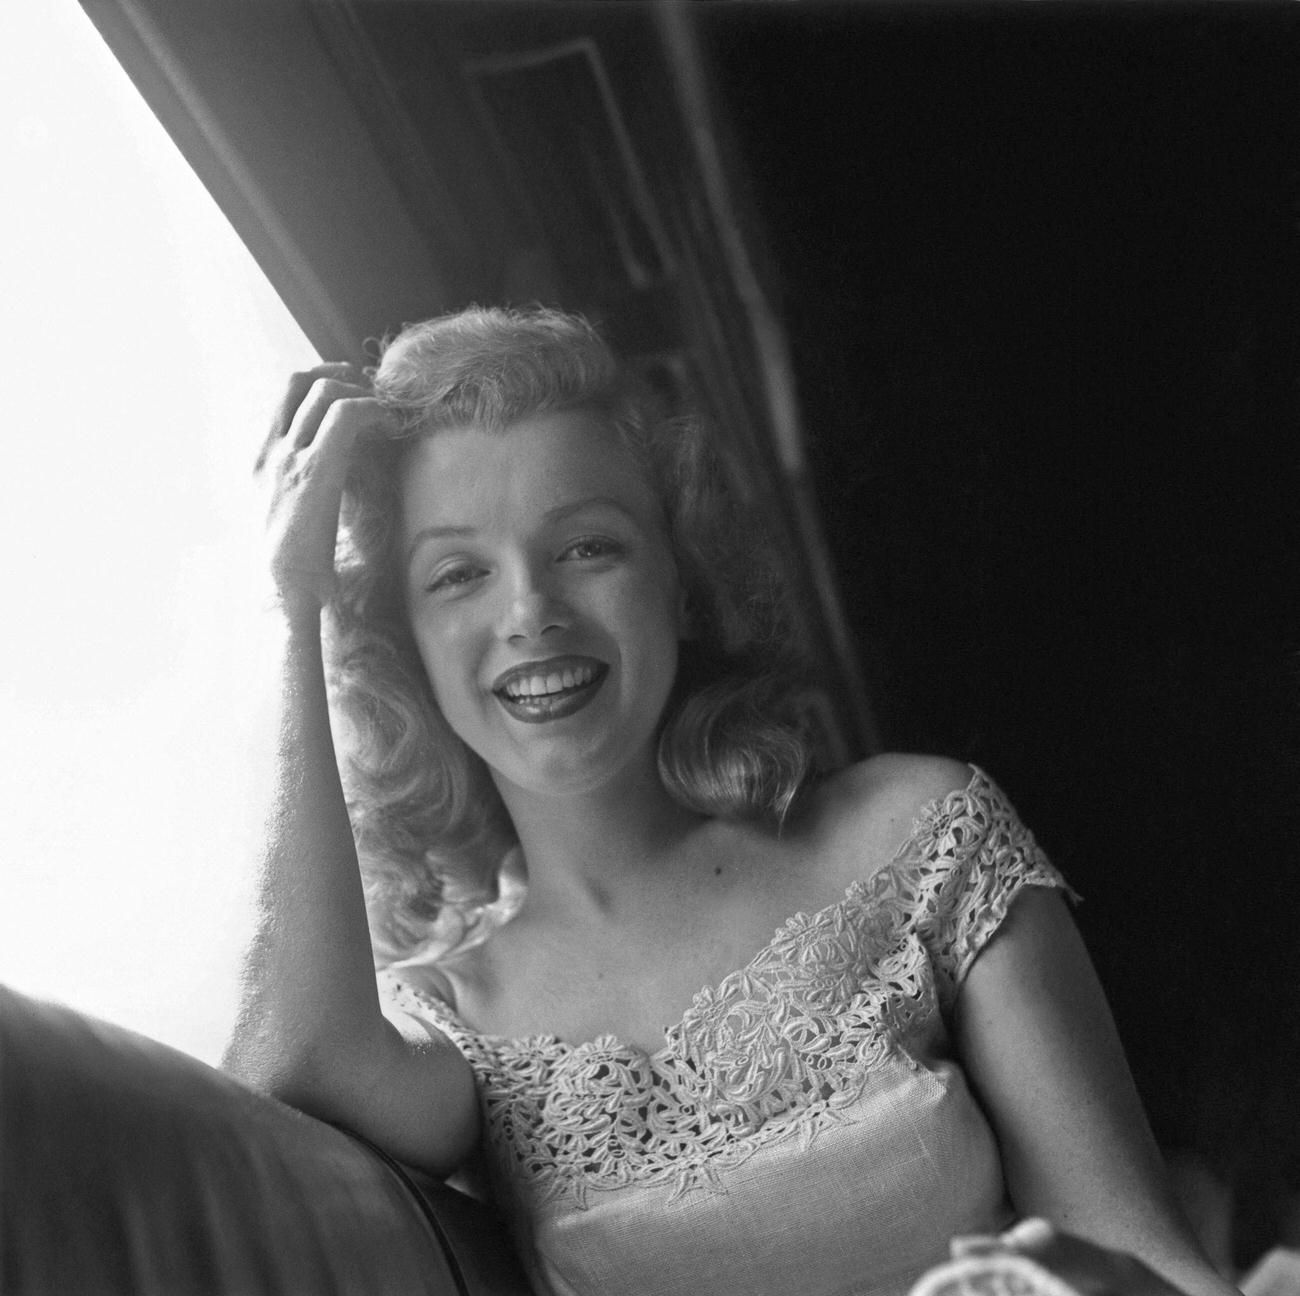 Marilyn Monroe riding on a train from New York City to Warrensburg, New York in June 1949.